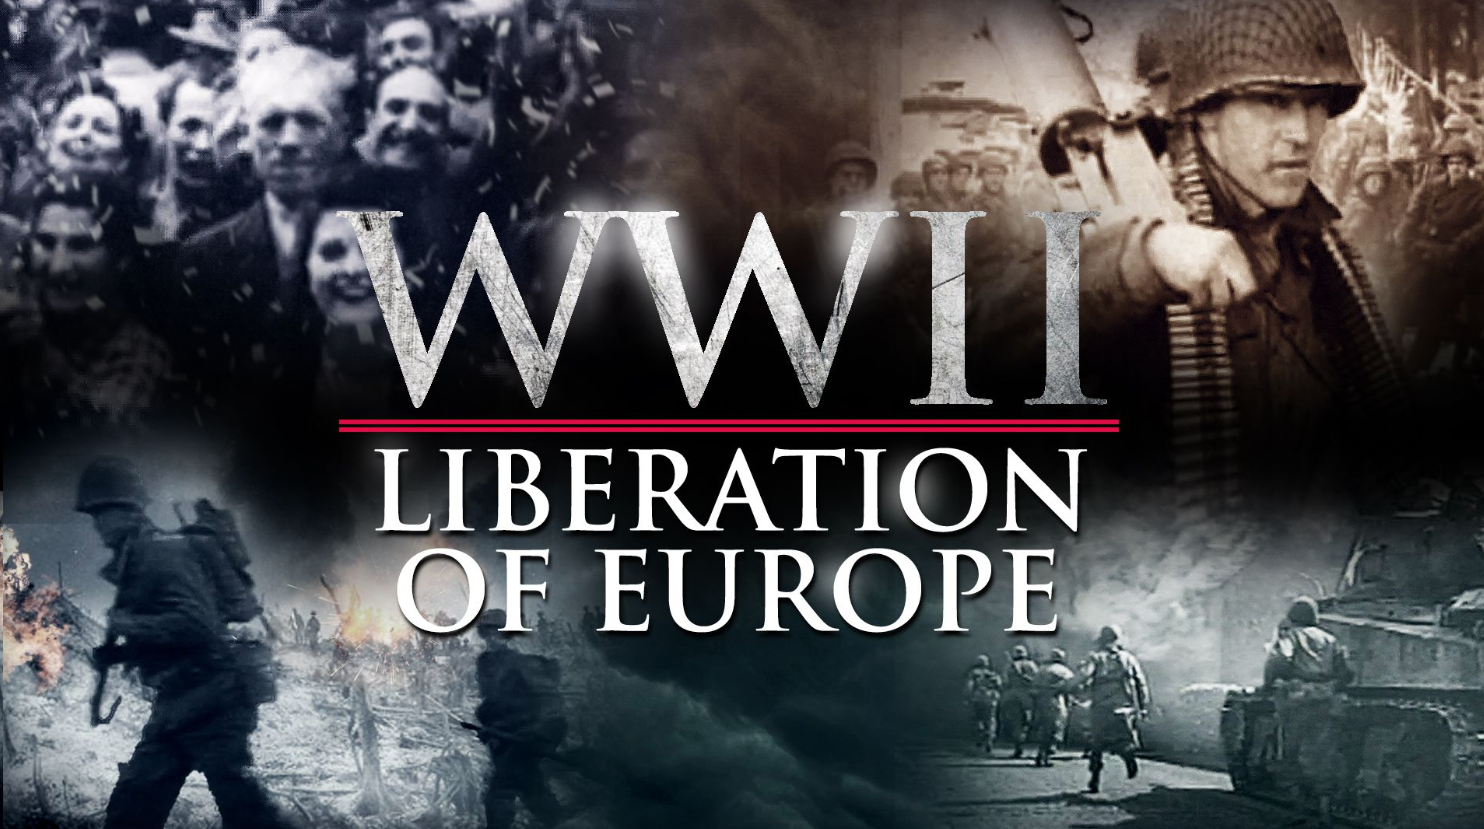 WWII: Liberation of Europe